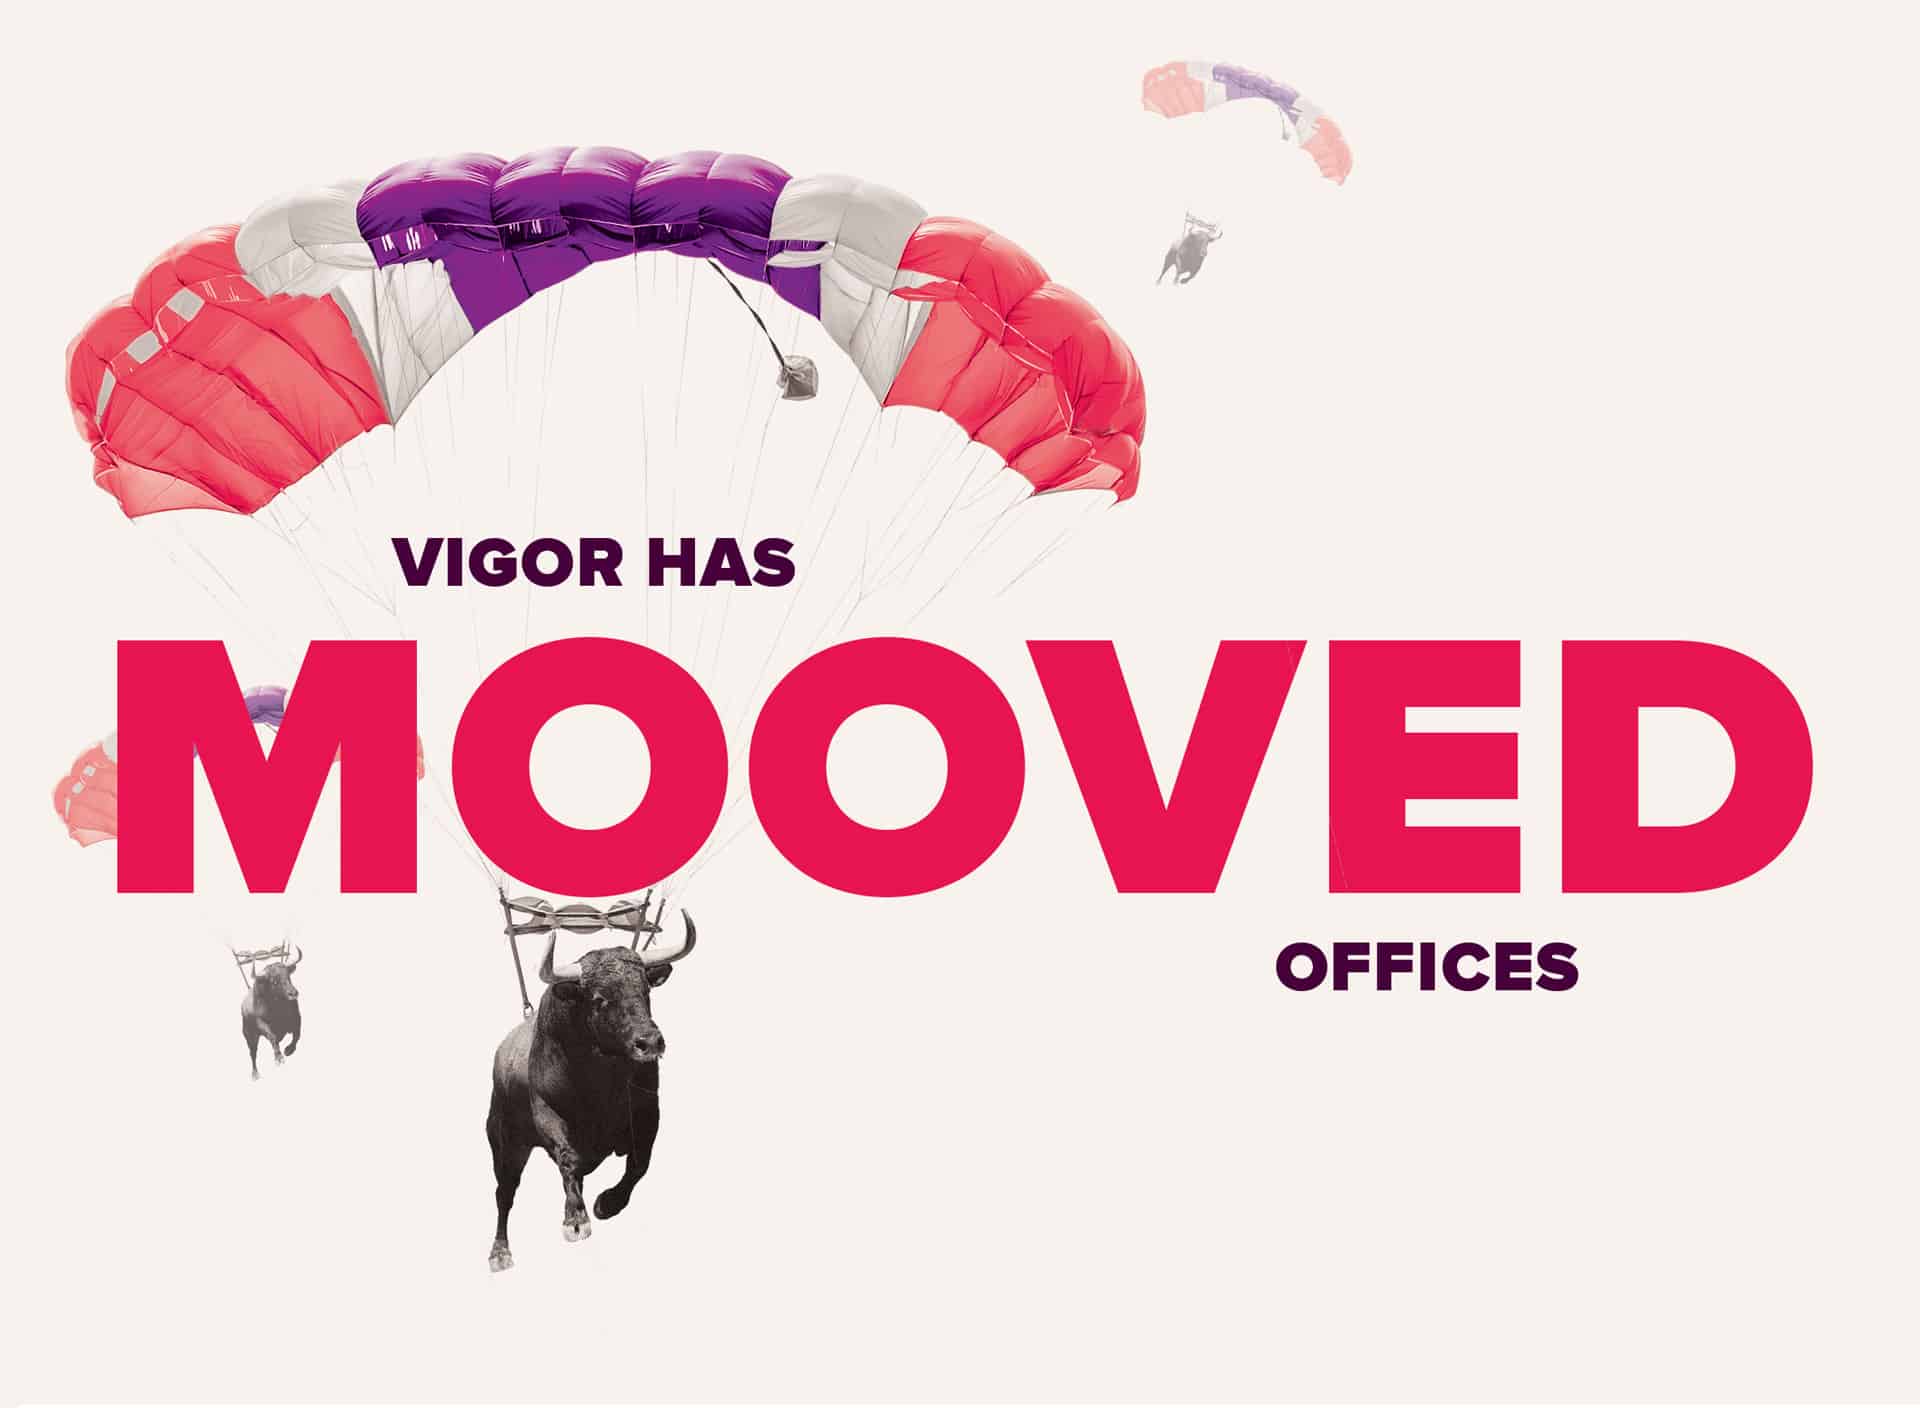 New offices for the Vigor team